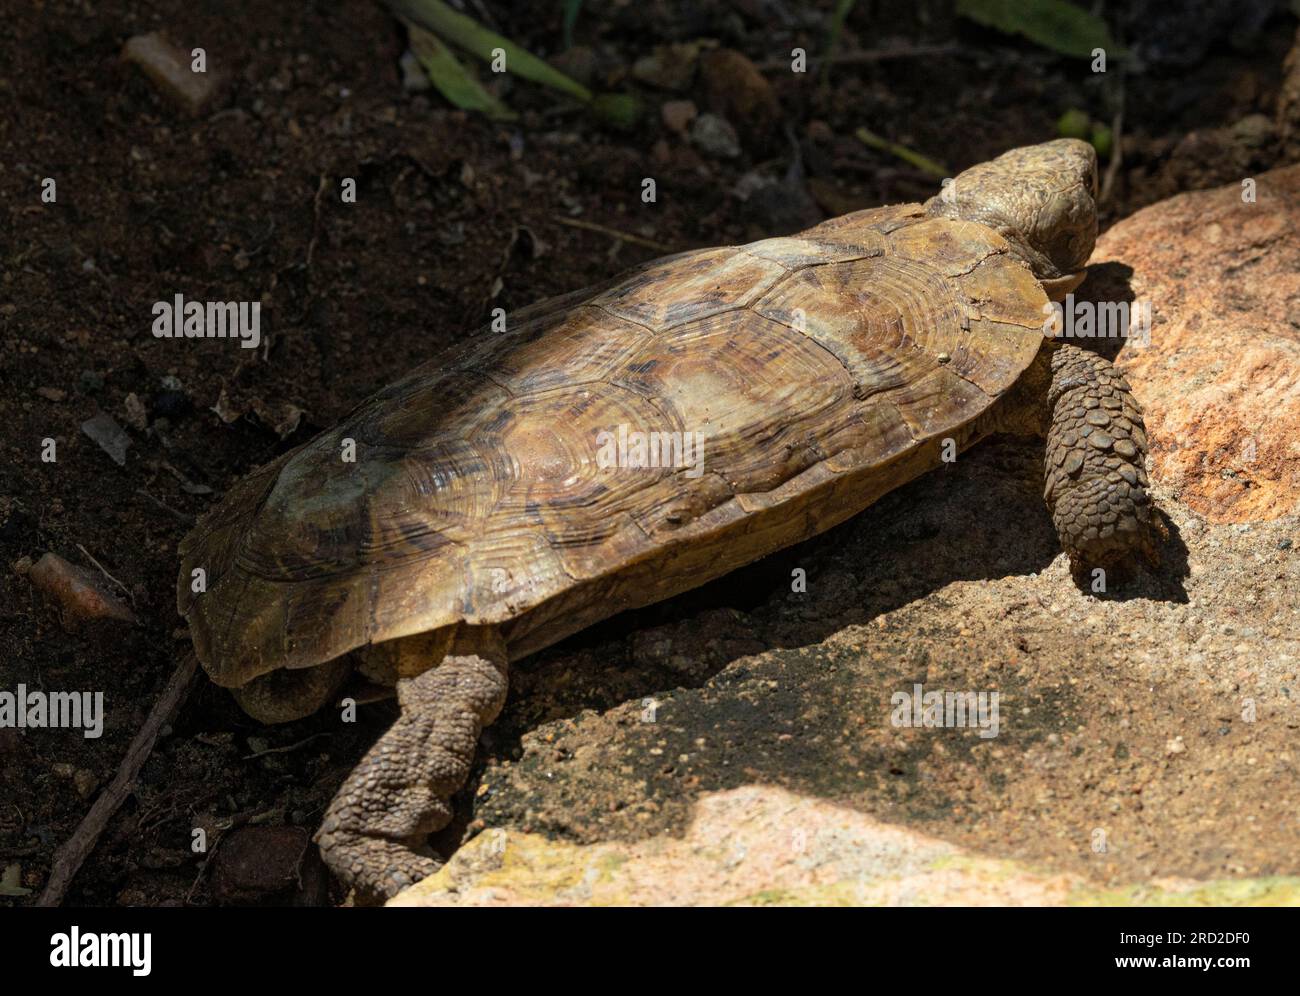 The rare Pancake Tortoise is endemic to the granite koppies of East Africa. They have a unique flattened and semi-flexible carapace. Stock Photo